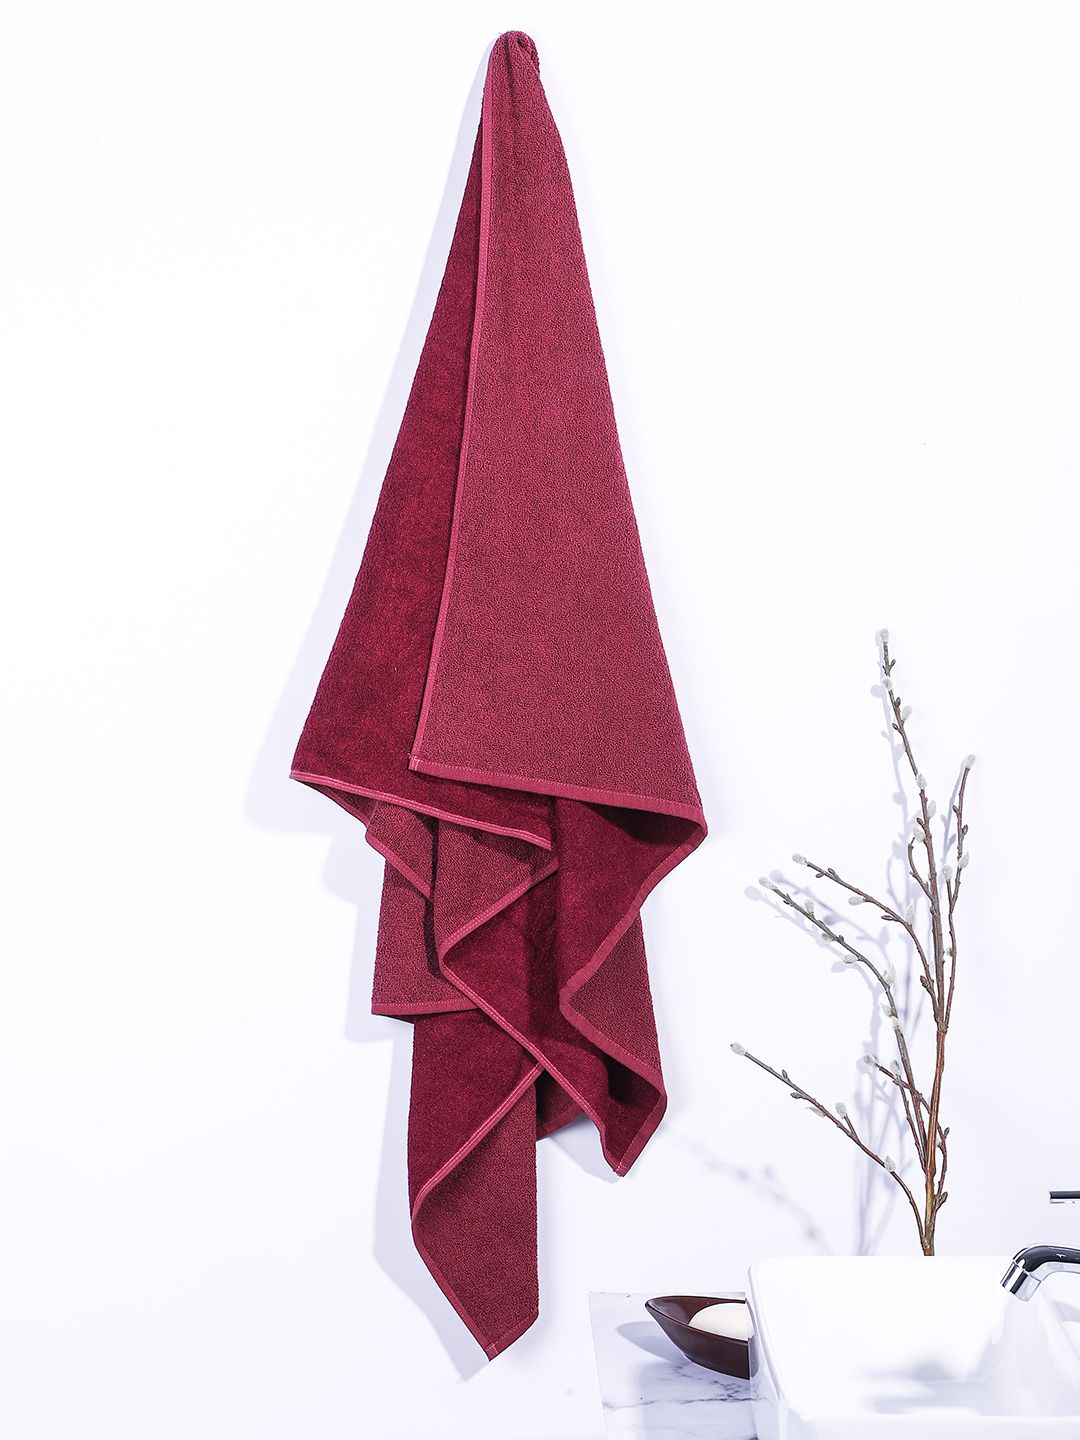 MUSH Red Solid 500 Gsm Bath Towel Price in India